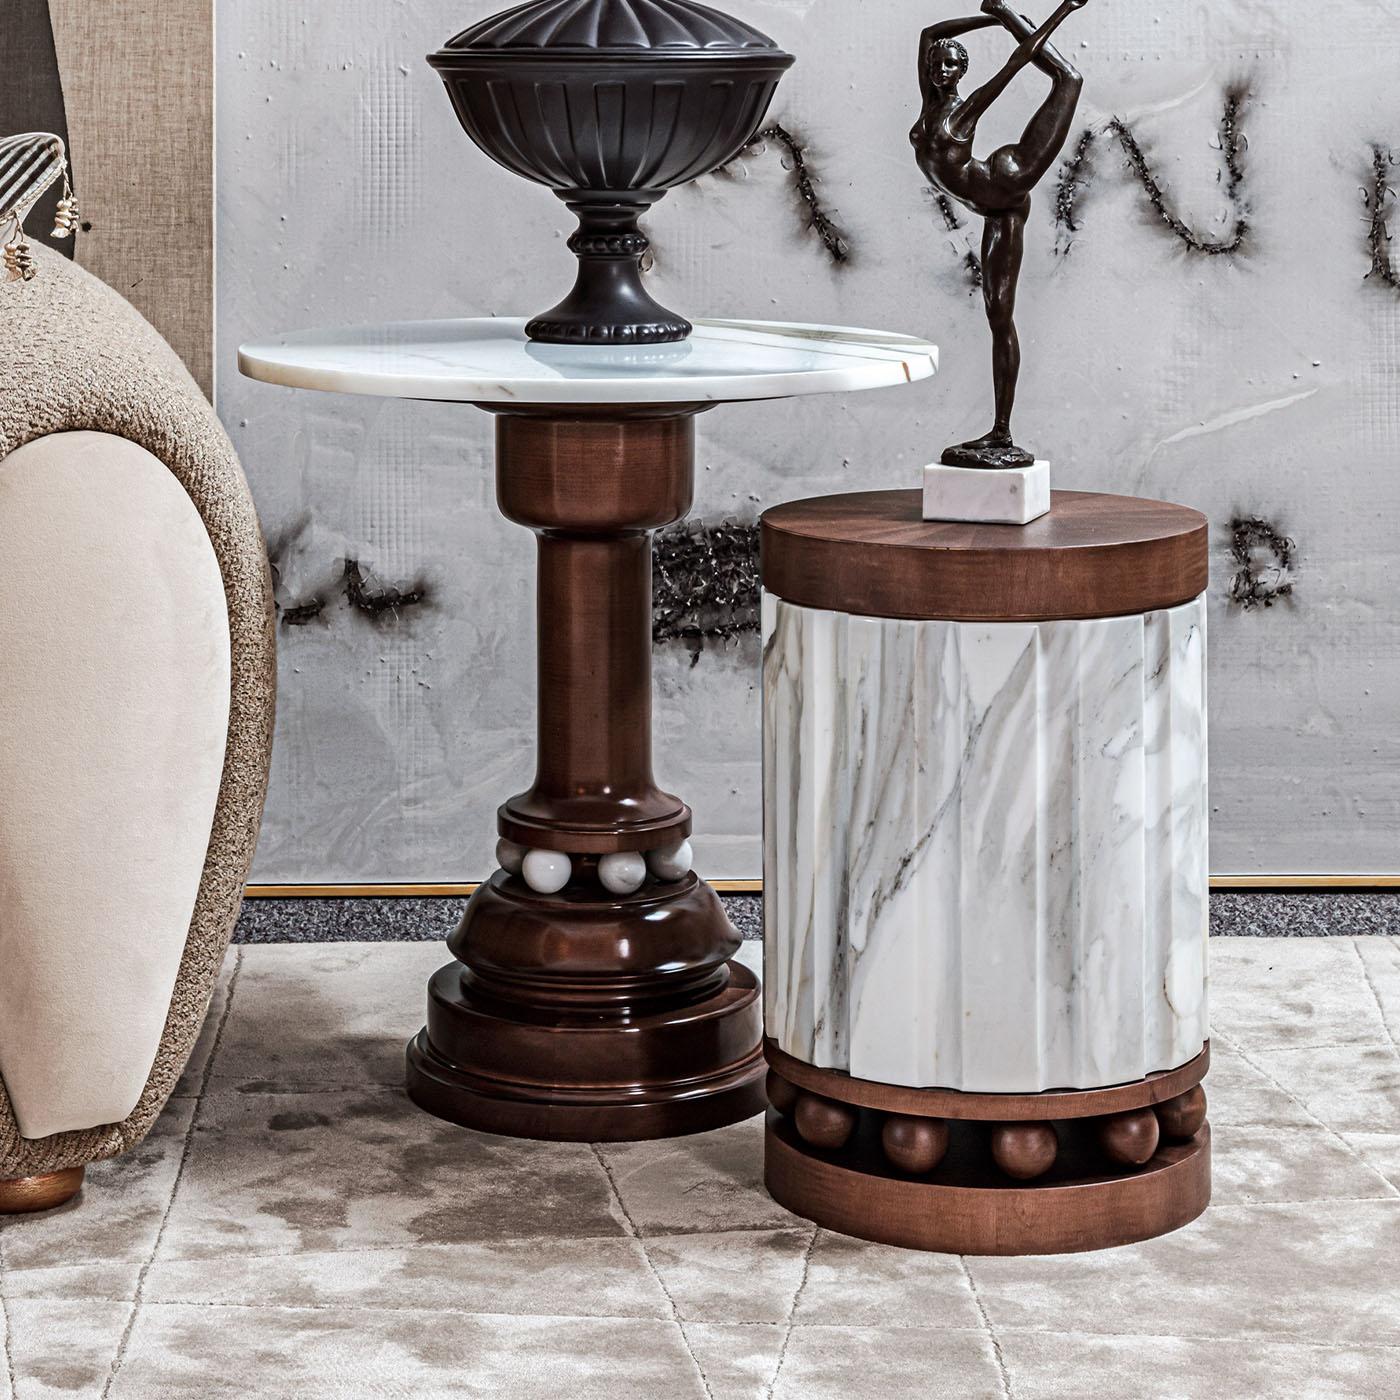 A solid wood base with marble embellishments distinguishes this side table. The delicate structure is anchored on spheres of Calacatta Borghini marble.